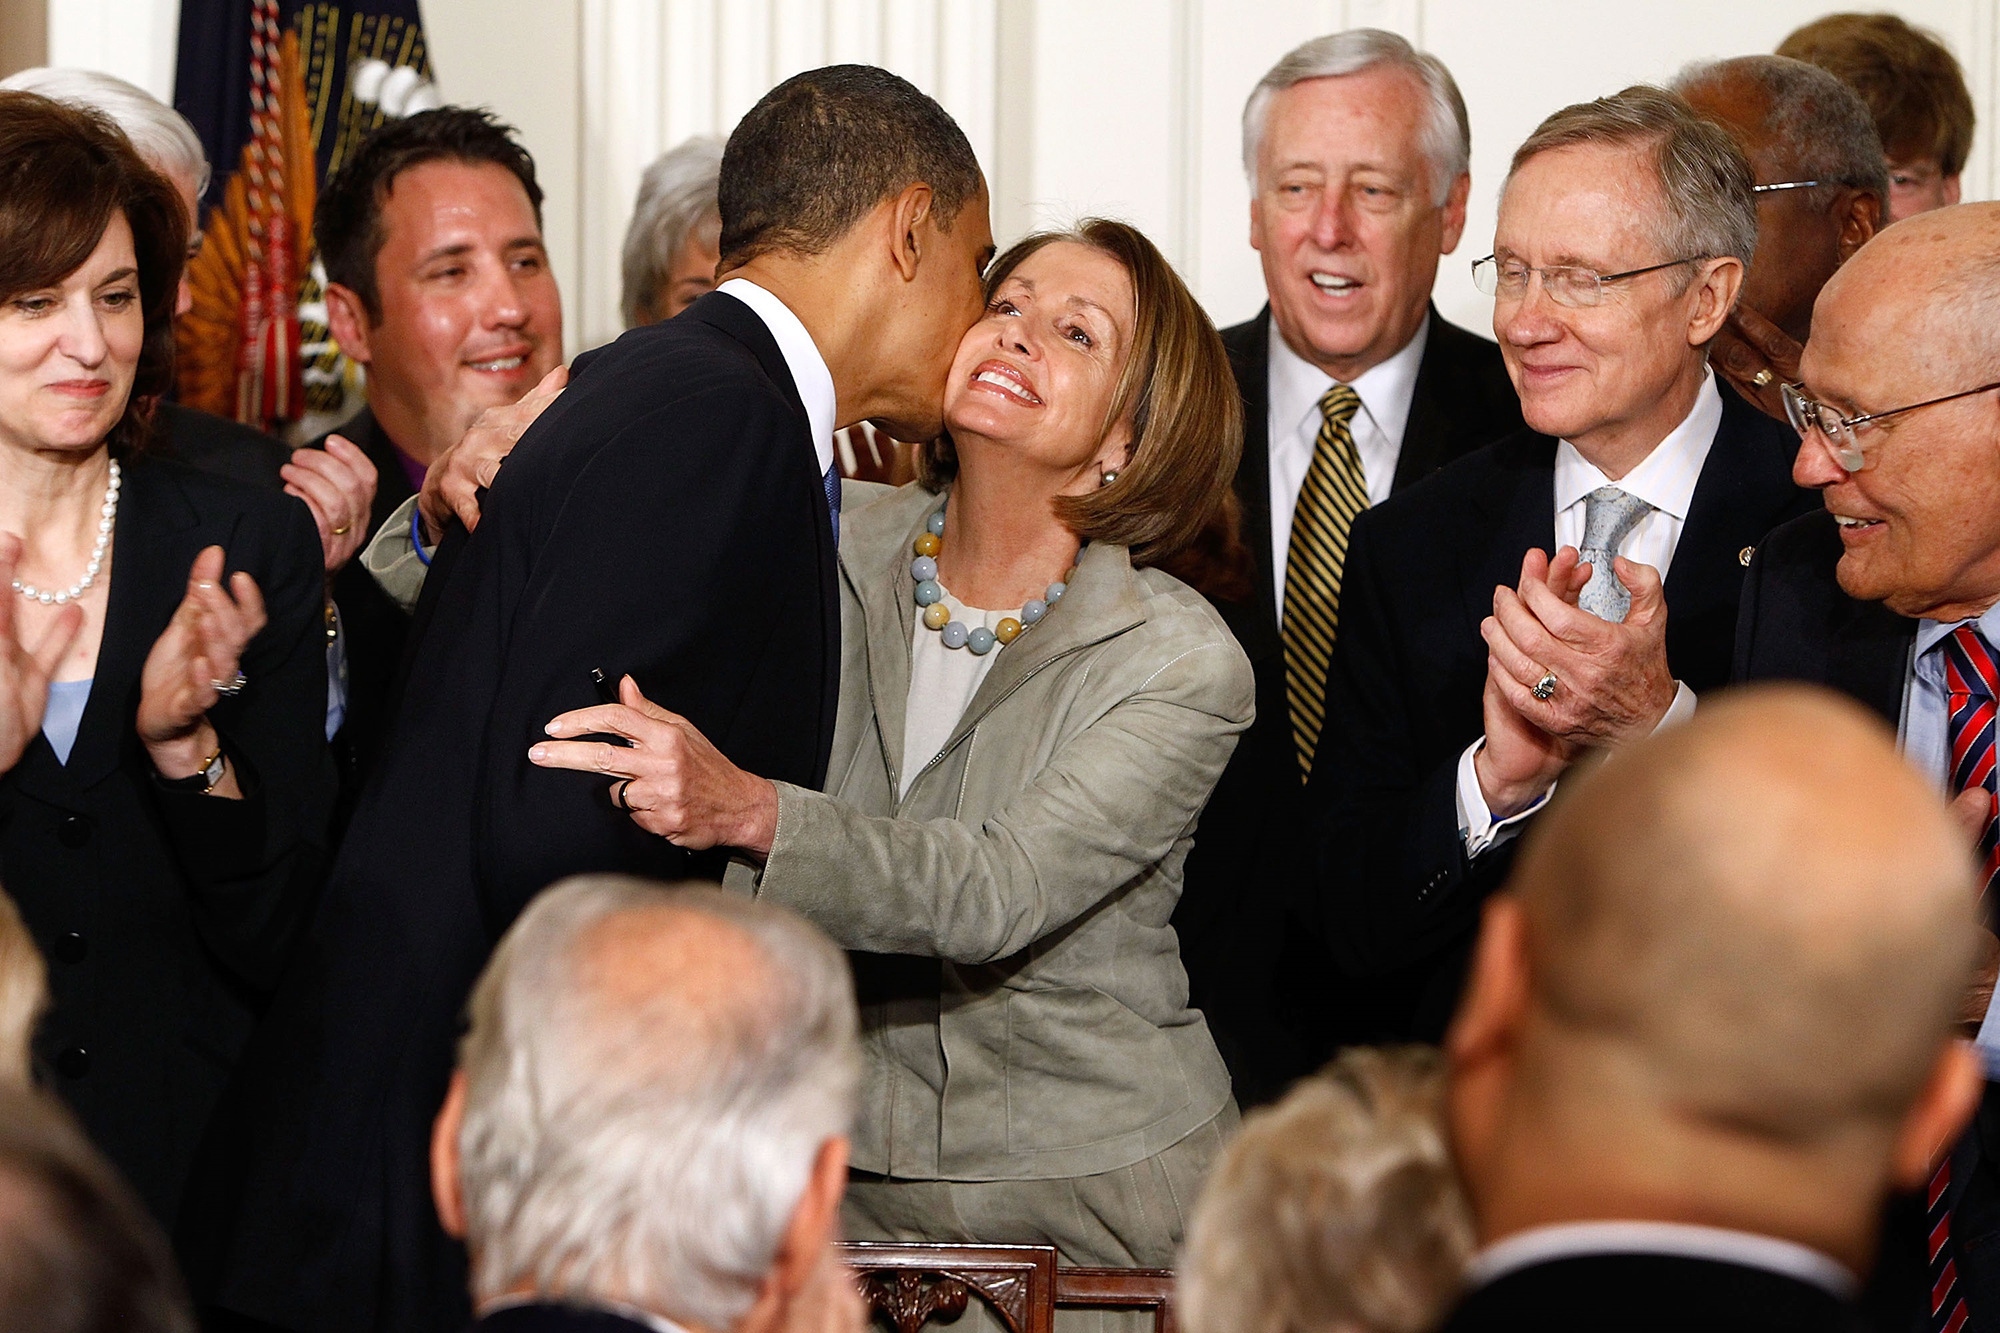 PHOTO: President Barack Obama kisses Speaker of the House Nancy Pelosi after signing the Affordable Health Care for America Act during a ceremony in the East Room of the White House, March 23, 2010.